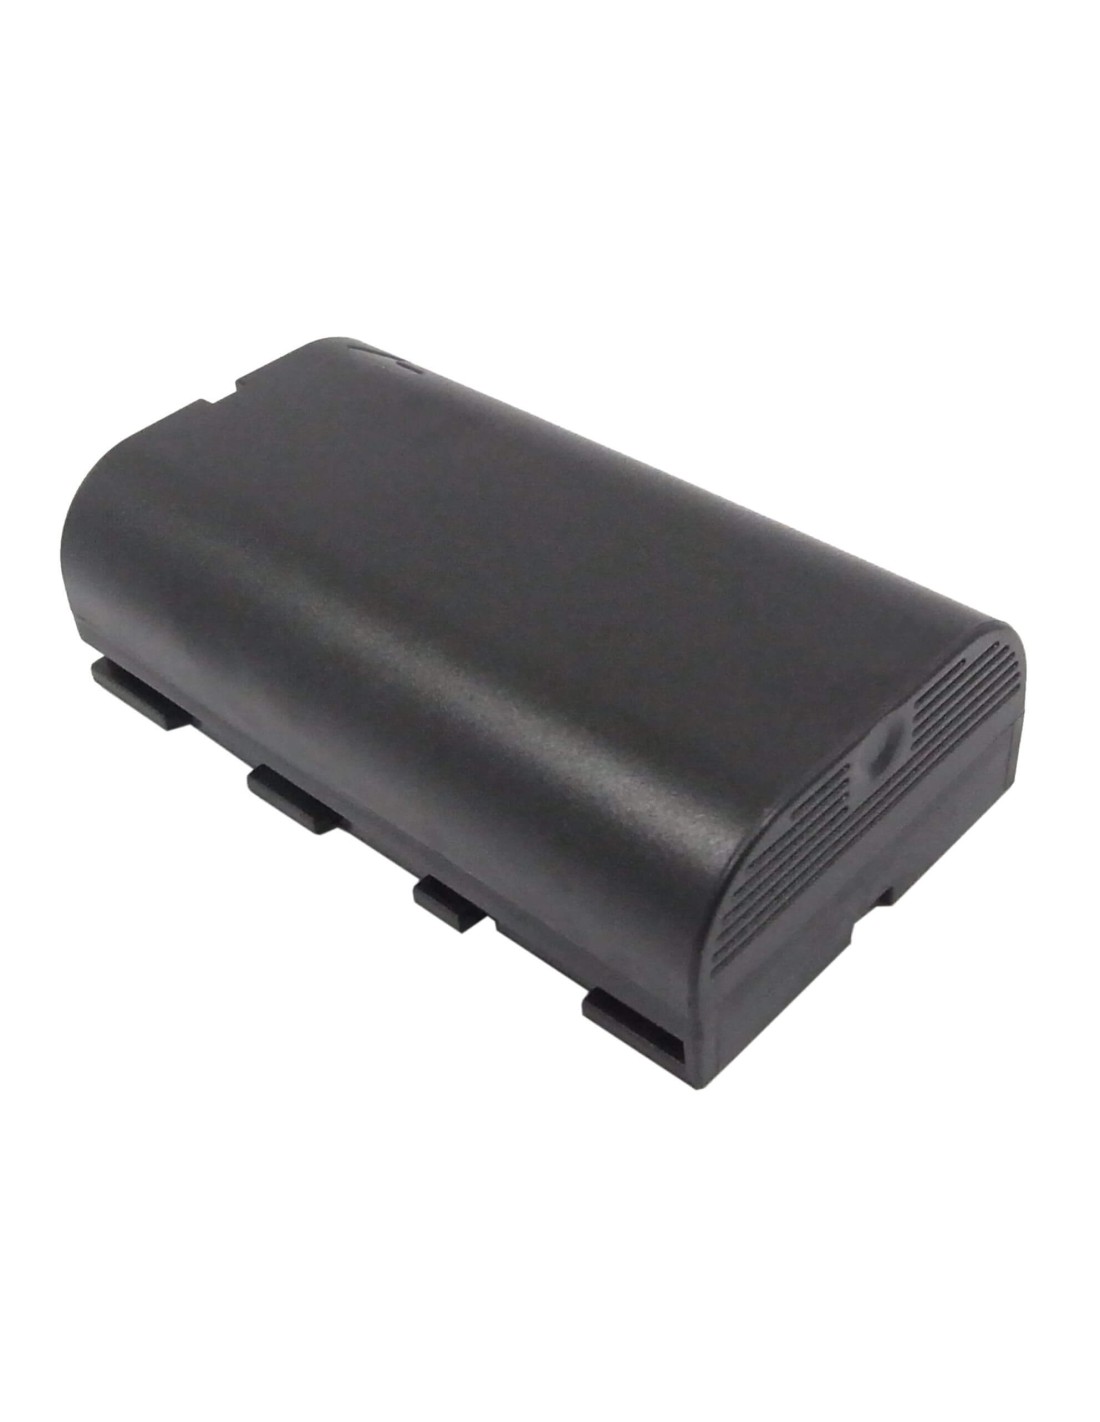 Battery for Leica Atx1200, Grx1200, Piper 100 7.4V, 2200mAh - 16.28Wh